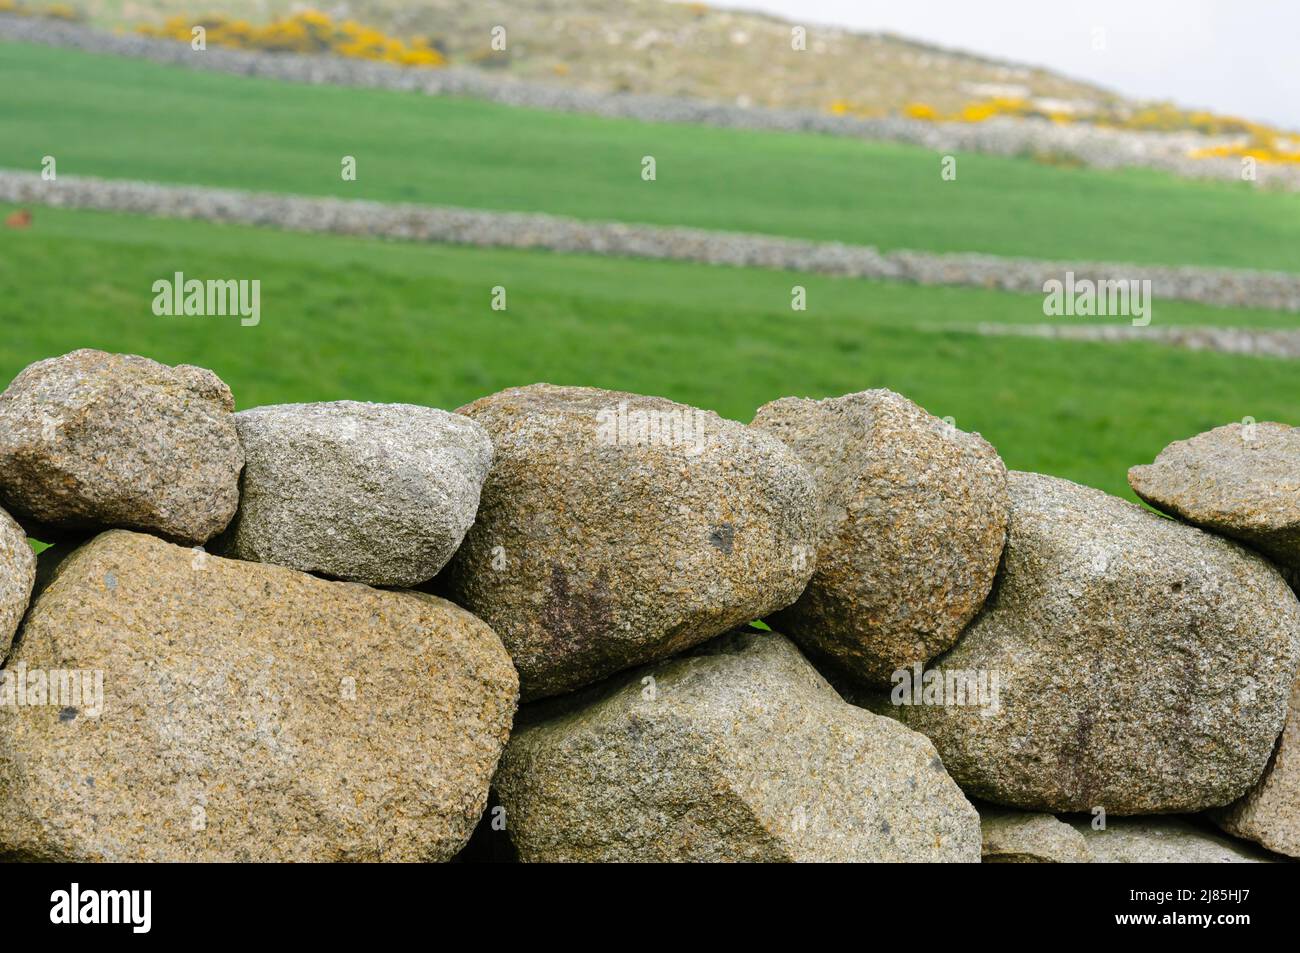 Traditional dry stone walls, common around the Mourne Mountains, Northern Ireland. Stock Photo